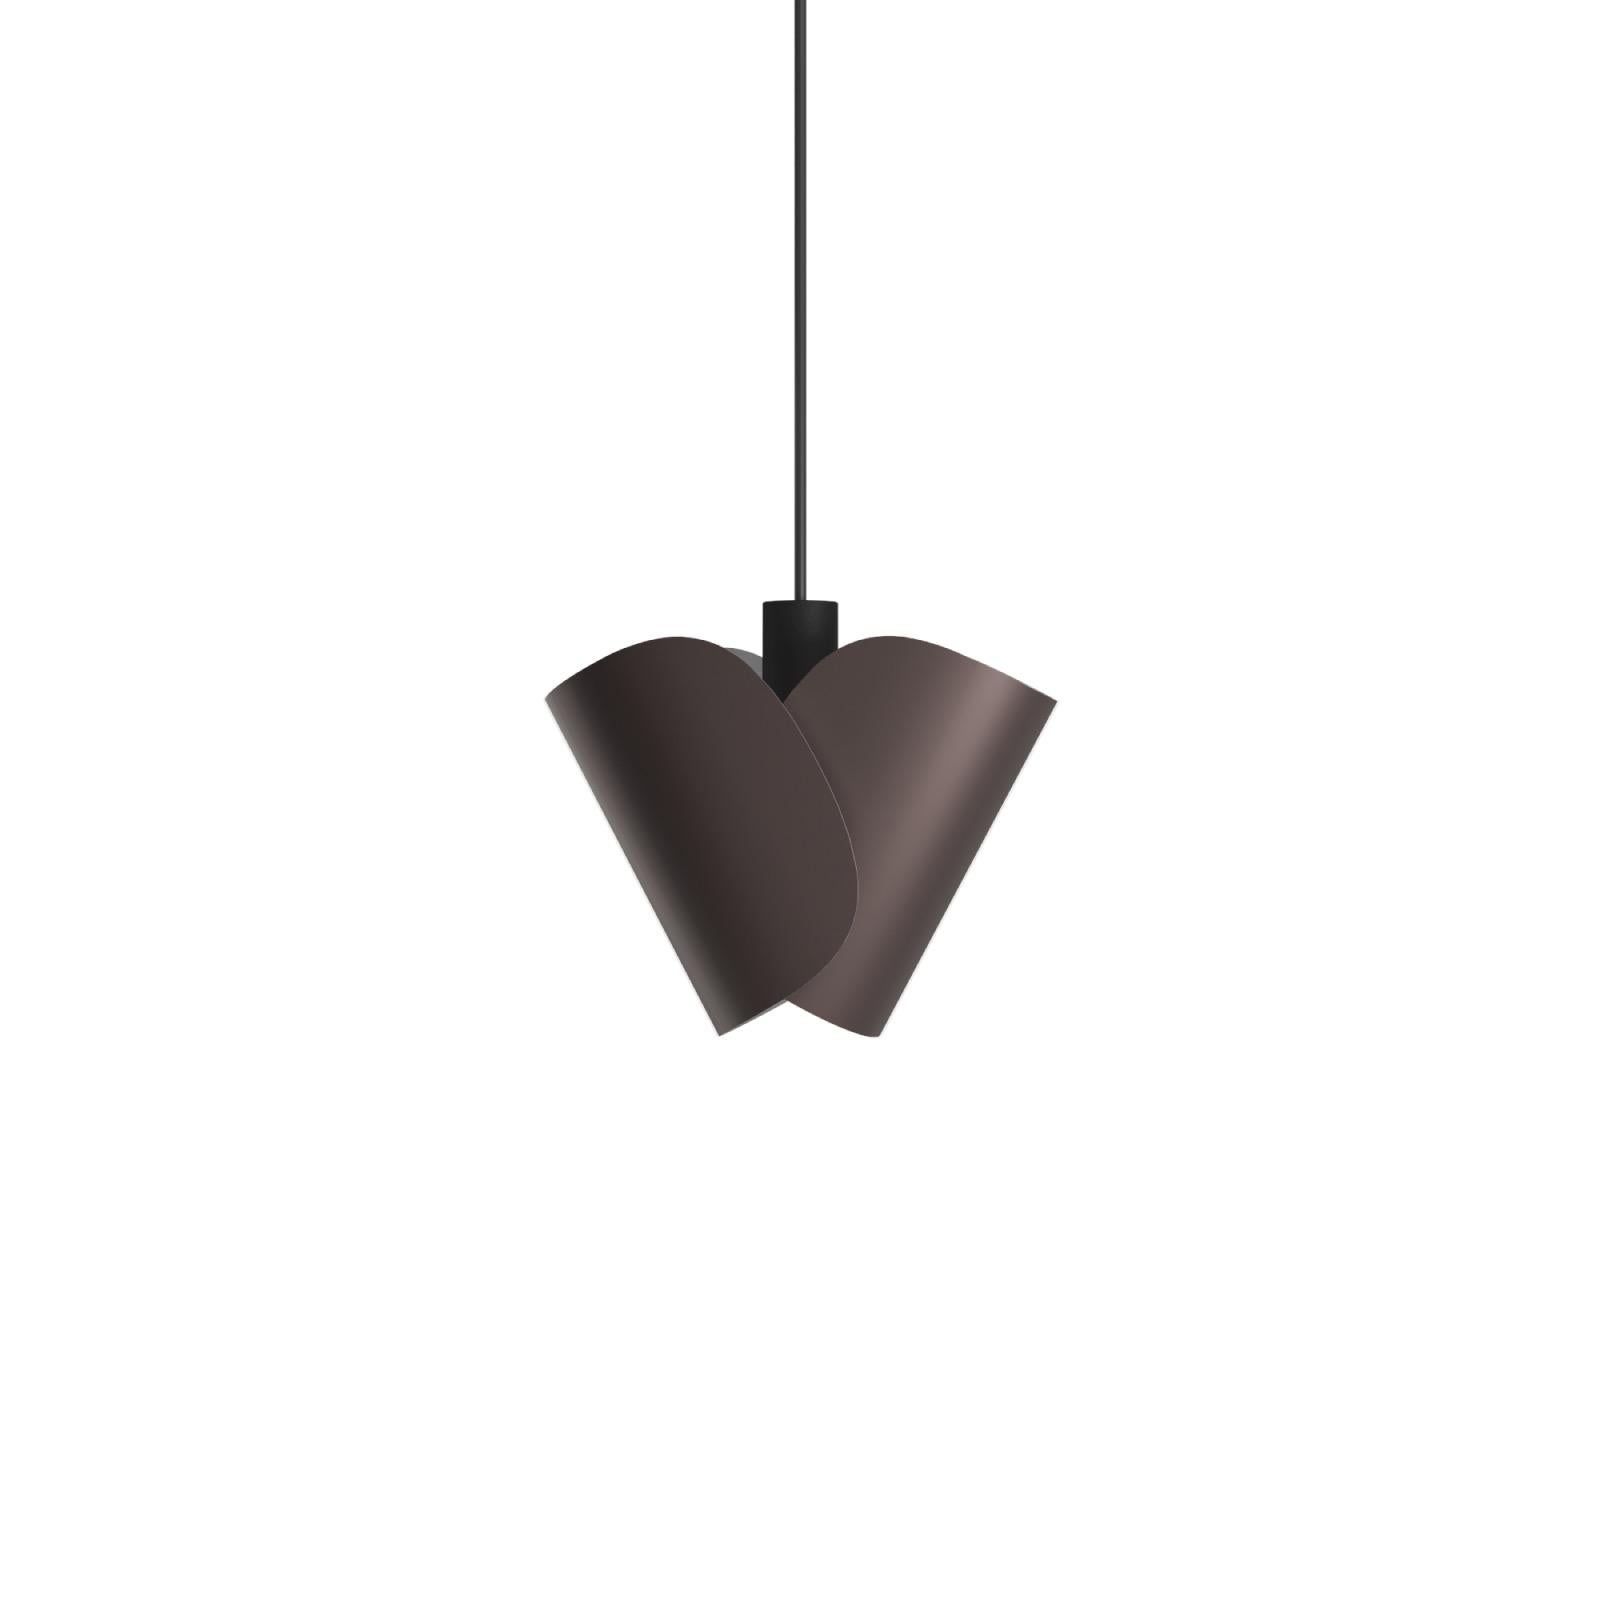 Flip Pendant lamp by Sebastian Herkner x AGO Lighting
Chocolate Pendant Lamp

Materials: Aluminum 
Light Source: E14
Watt. Max 20 W 
Cable Length: 3m 

Available colors:
Charcoal, chocolat, deep green

Available in vegan leather: Brown or